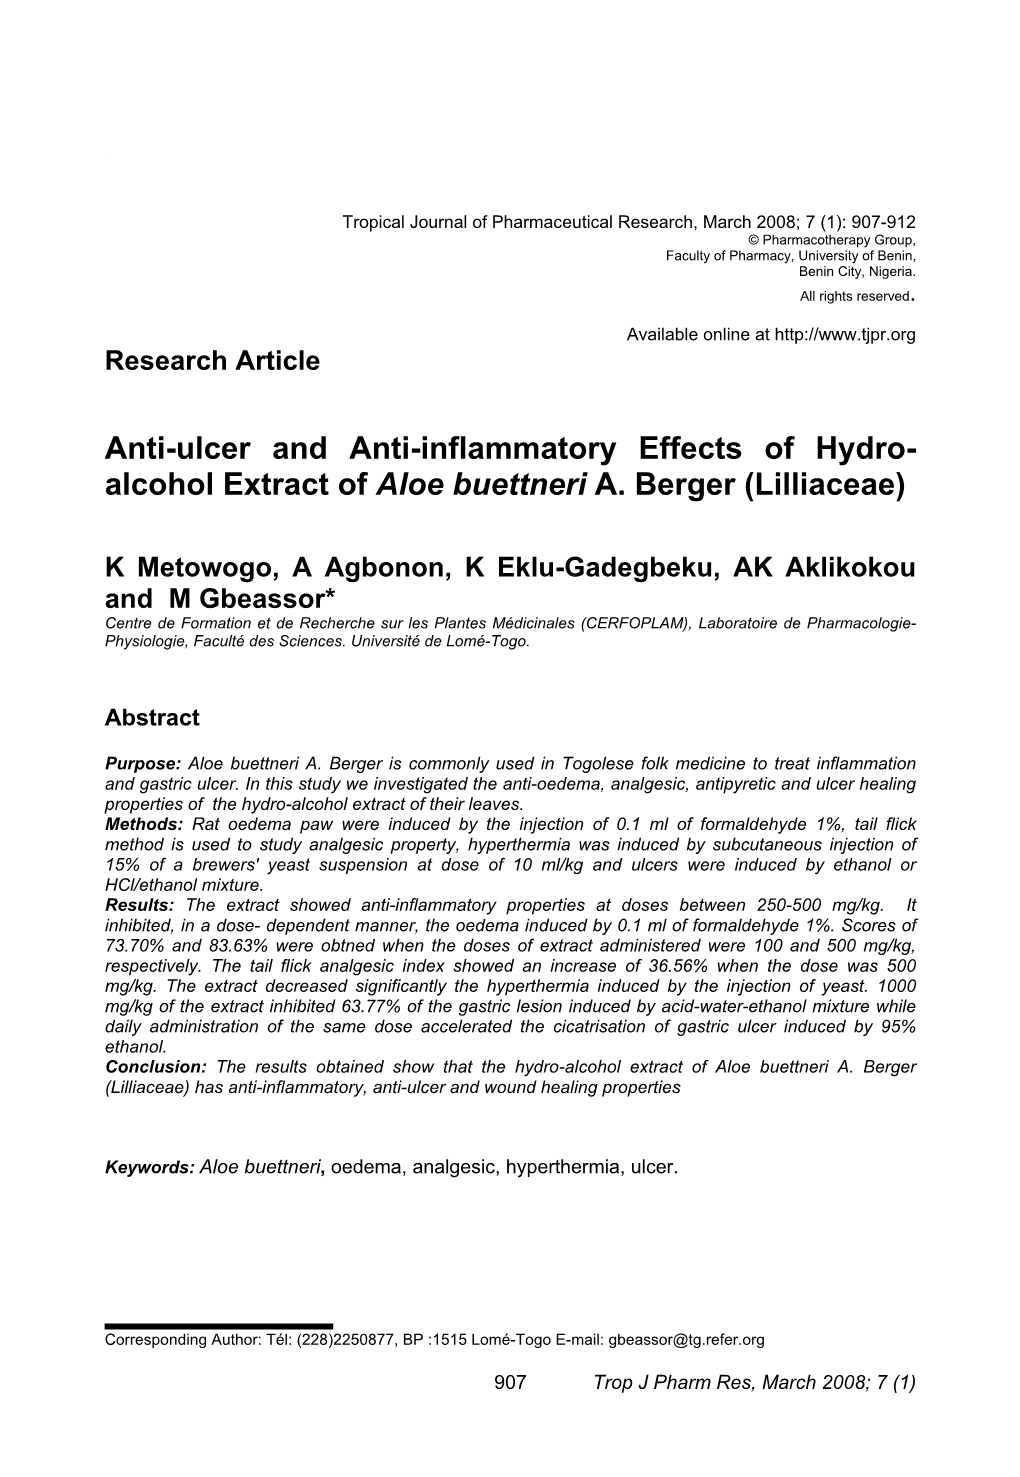 Anti-Ulcer and Anti-Inflammatory Effects of Hydro- Alcohol Extract of Aloe Buettneri A. Berger (Lilliaceae)